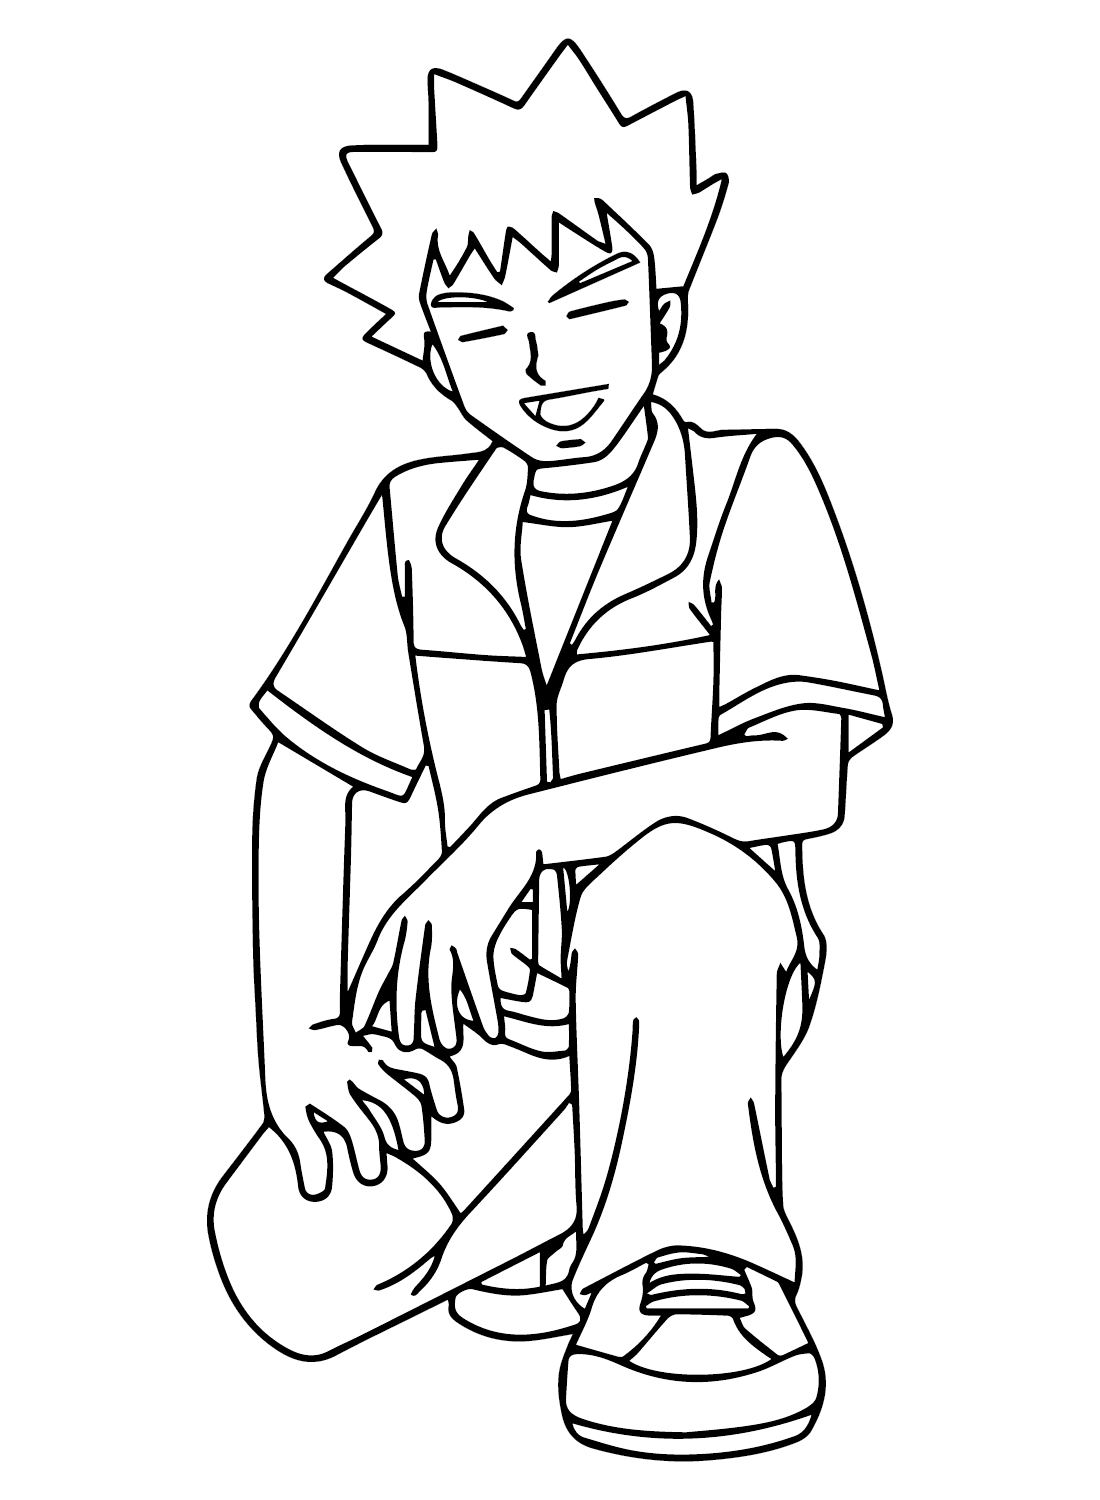 Brock Coloring Page from Brock